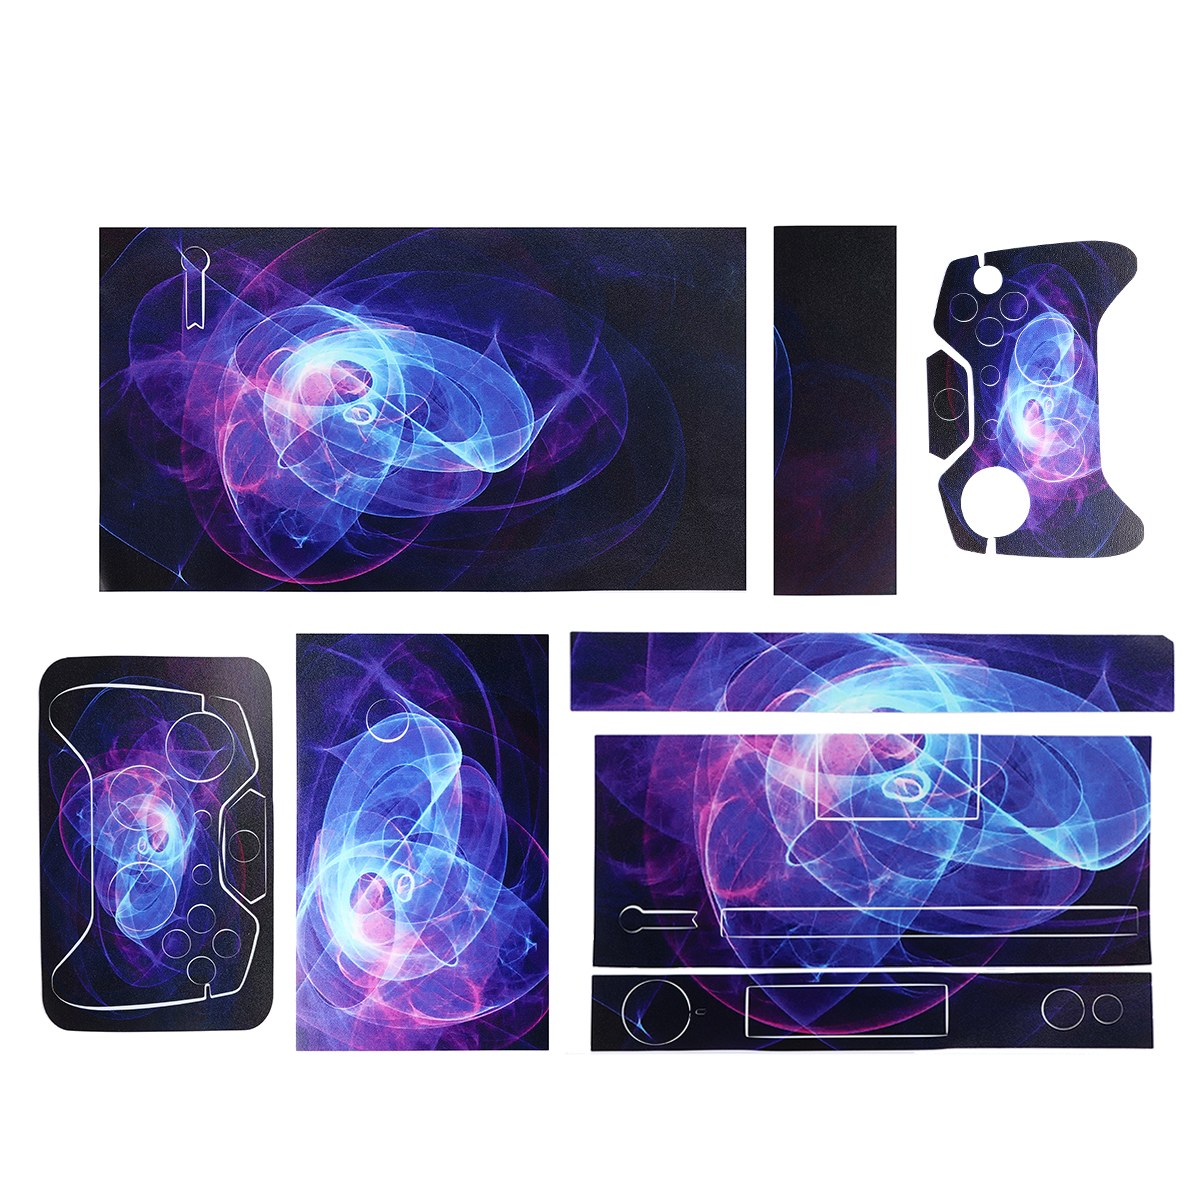 Purple Protective Vinyl Decal Skin Stickers Wrap Cover For Xbox One Game Console Game Controller Kinect 16